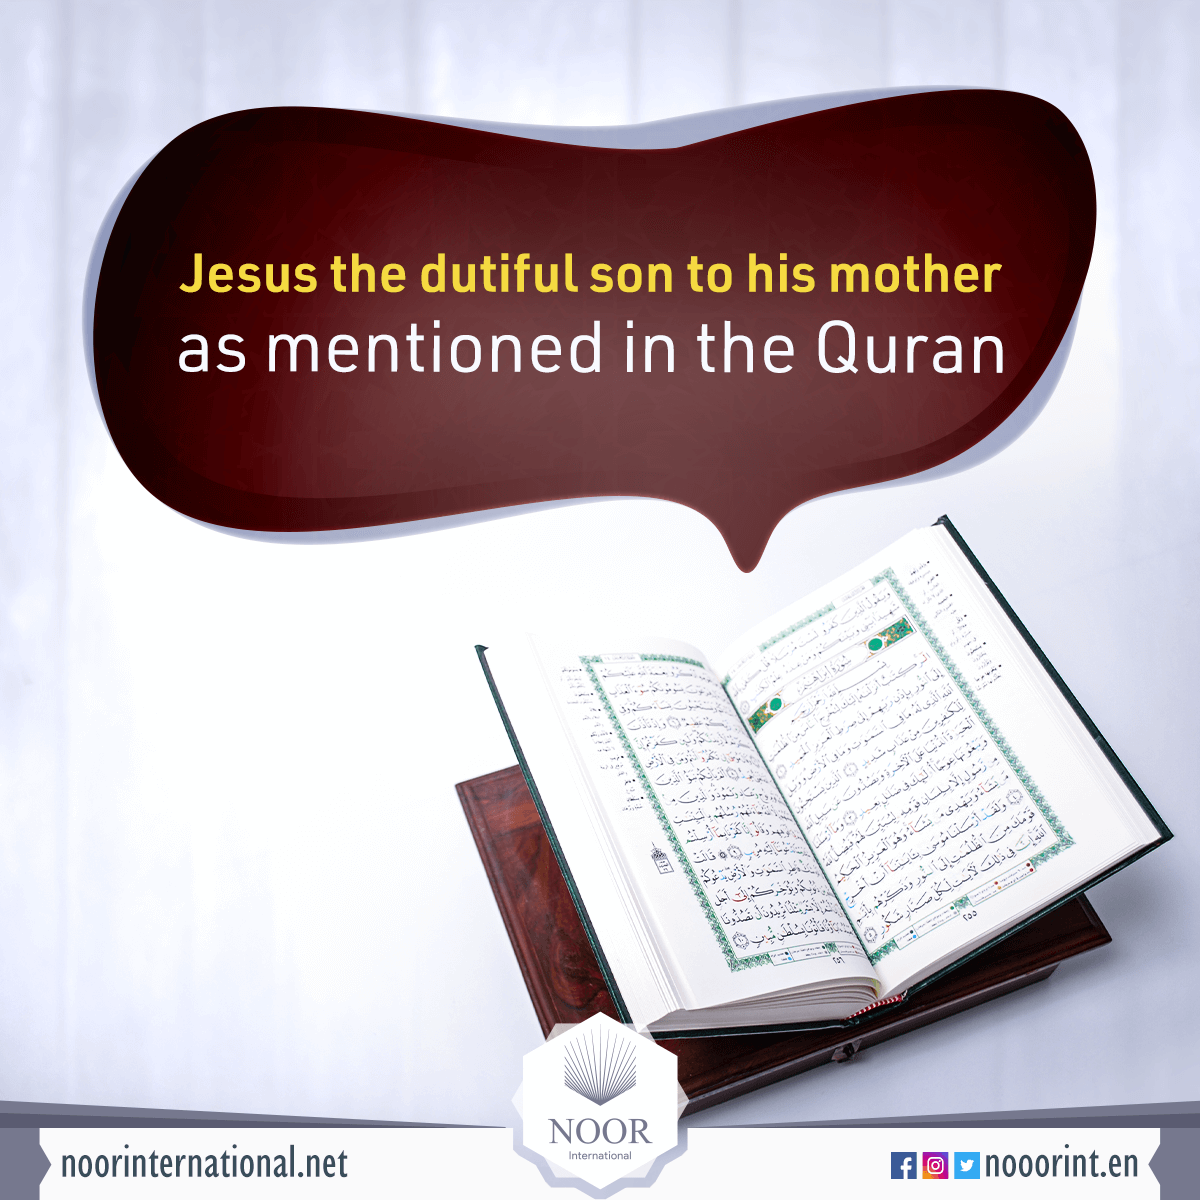 Jesus the dutiful son to his mother as mentioned in the Quran